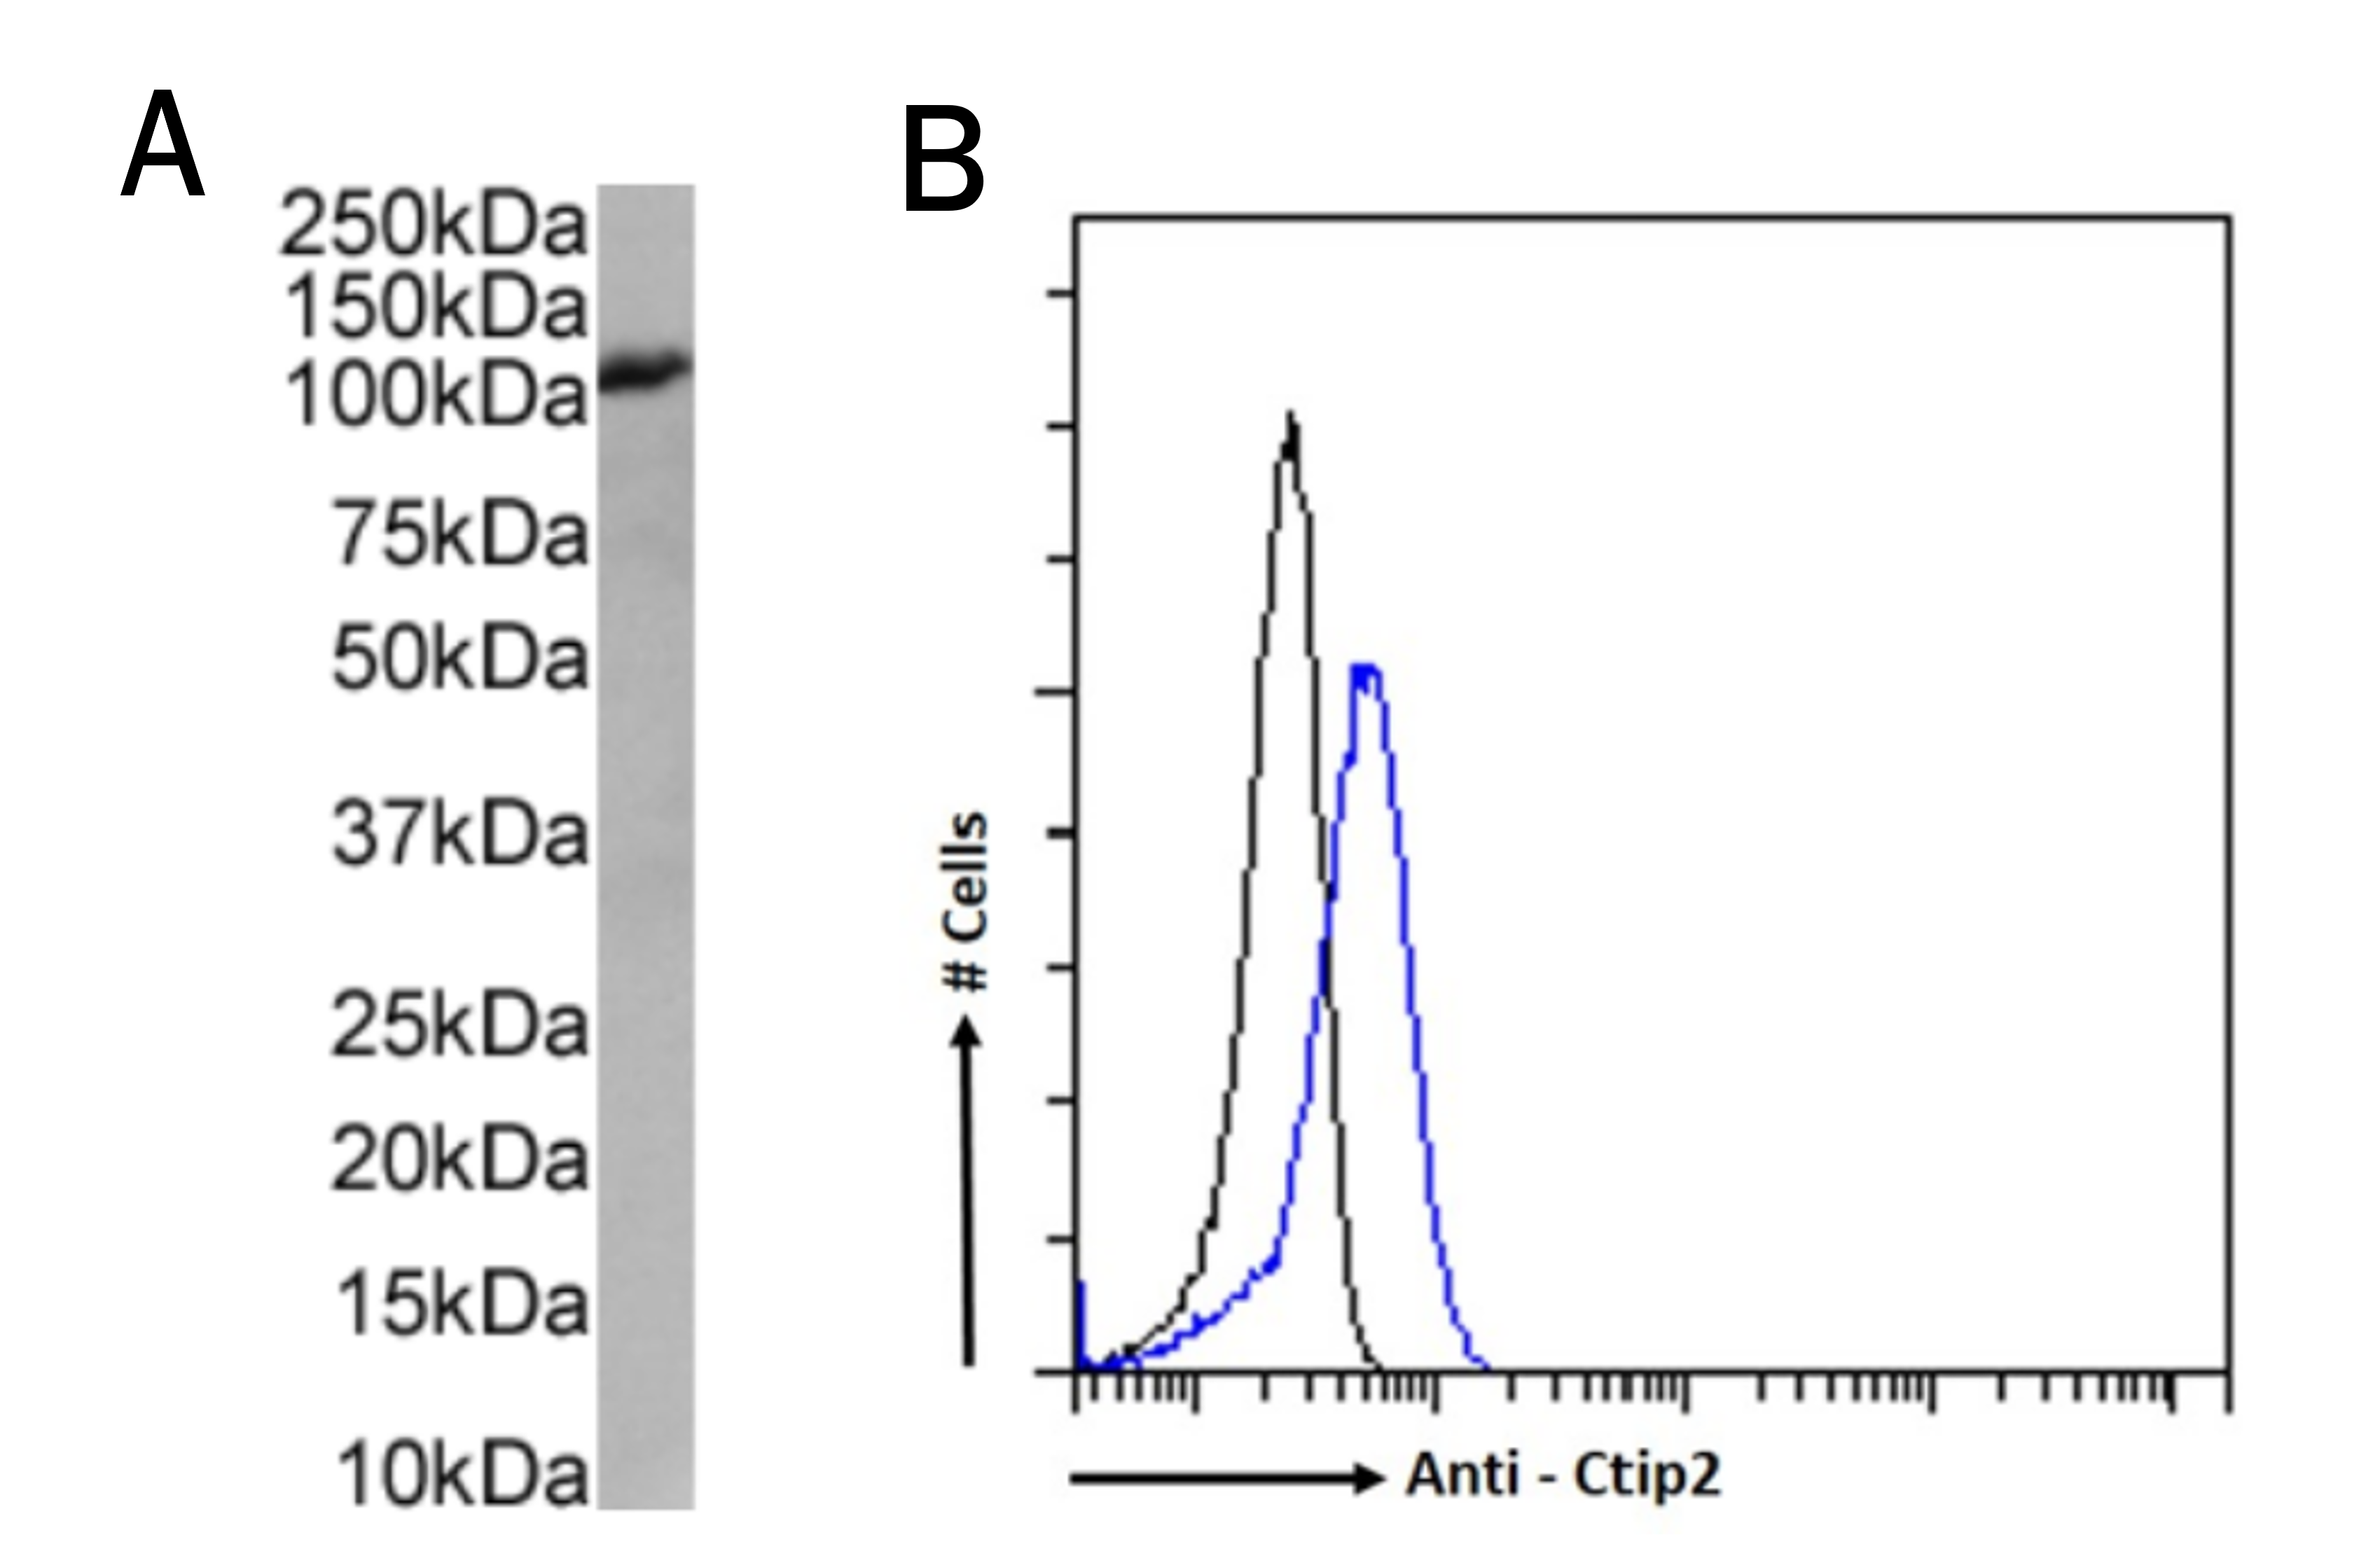 Western Blot displaying a single strong band at the 125kDa mark. Flow Cytometry anaylsis showing a single peak for the recombinant anti-Ctip2 antibody, and a single peak at a different point for the isotype control.